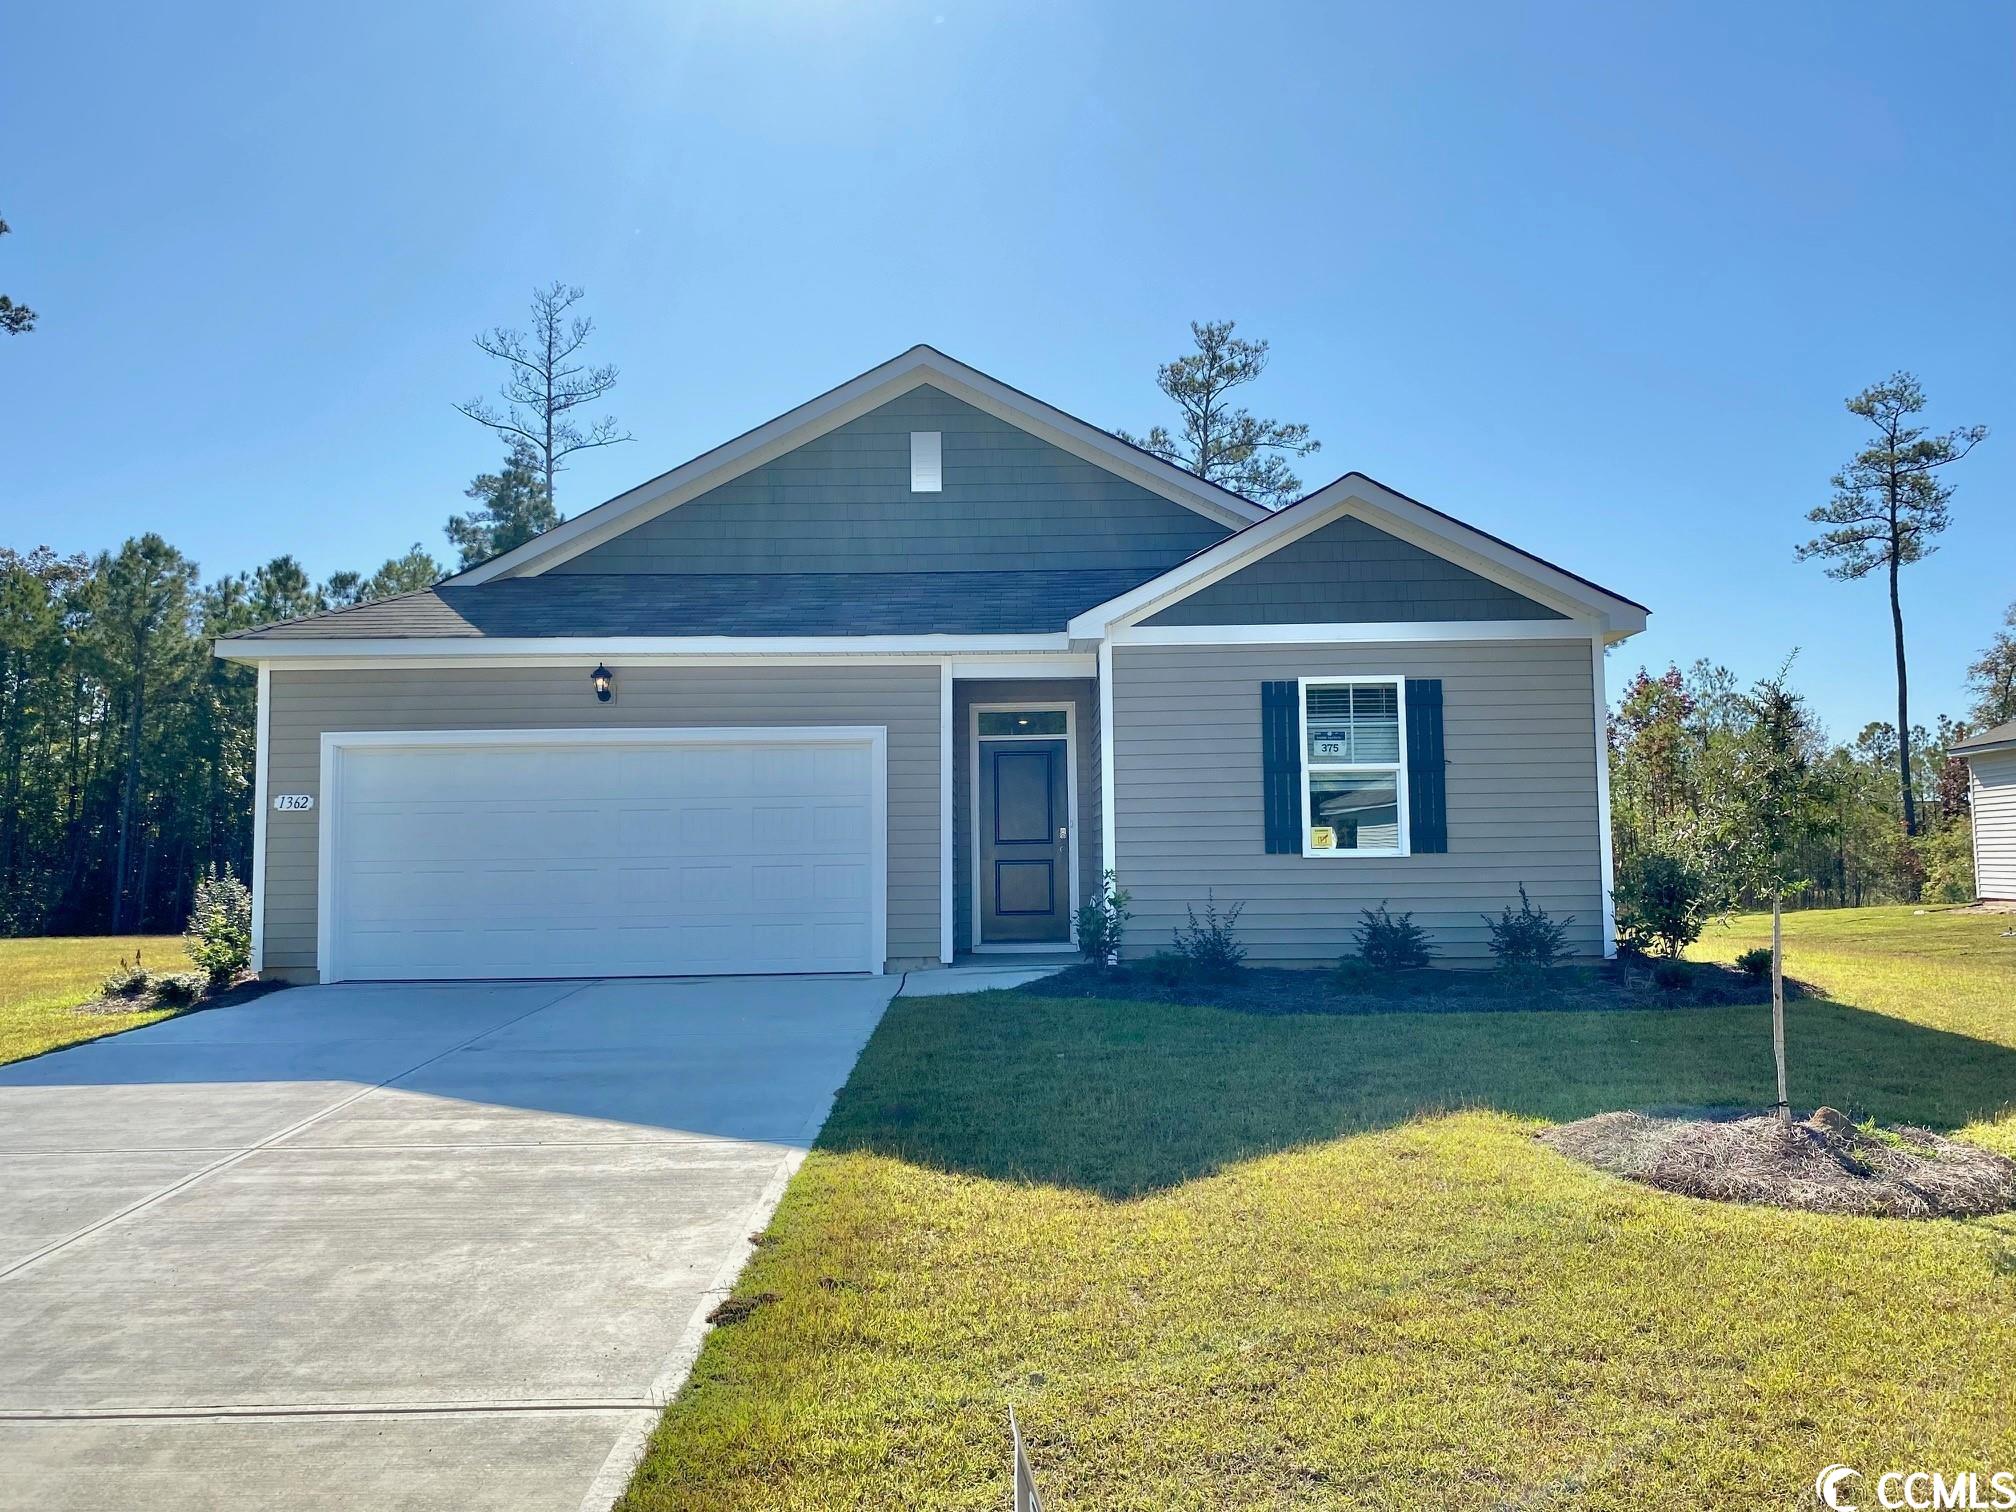 1362 Porchfield Dr. Conway, SC 29526